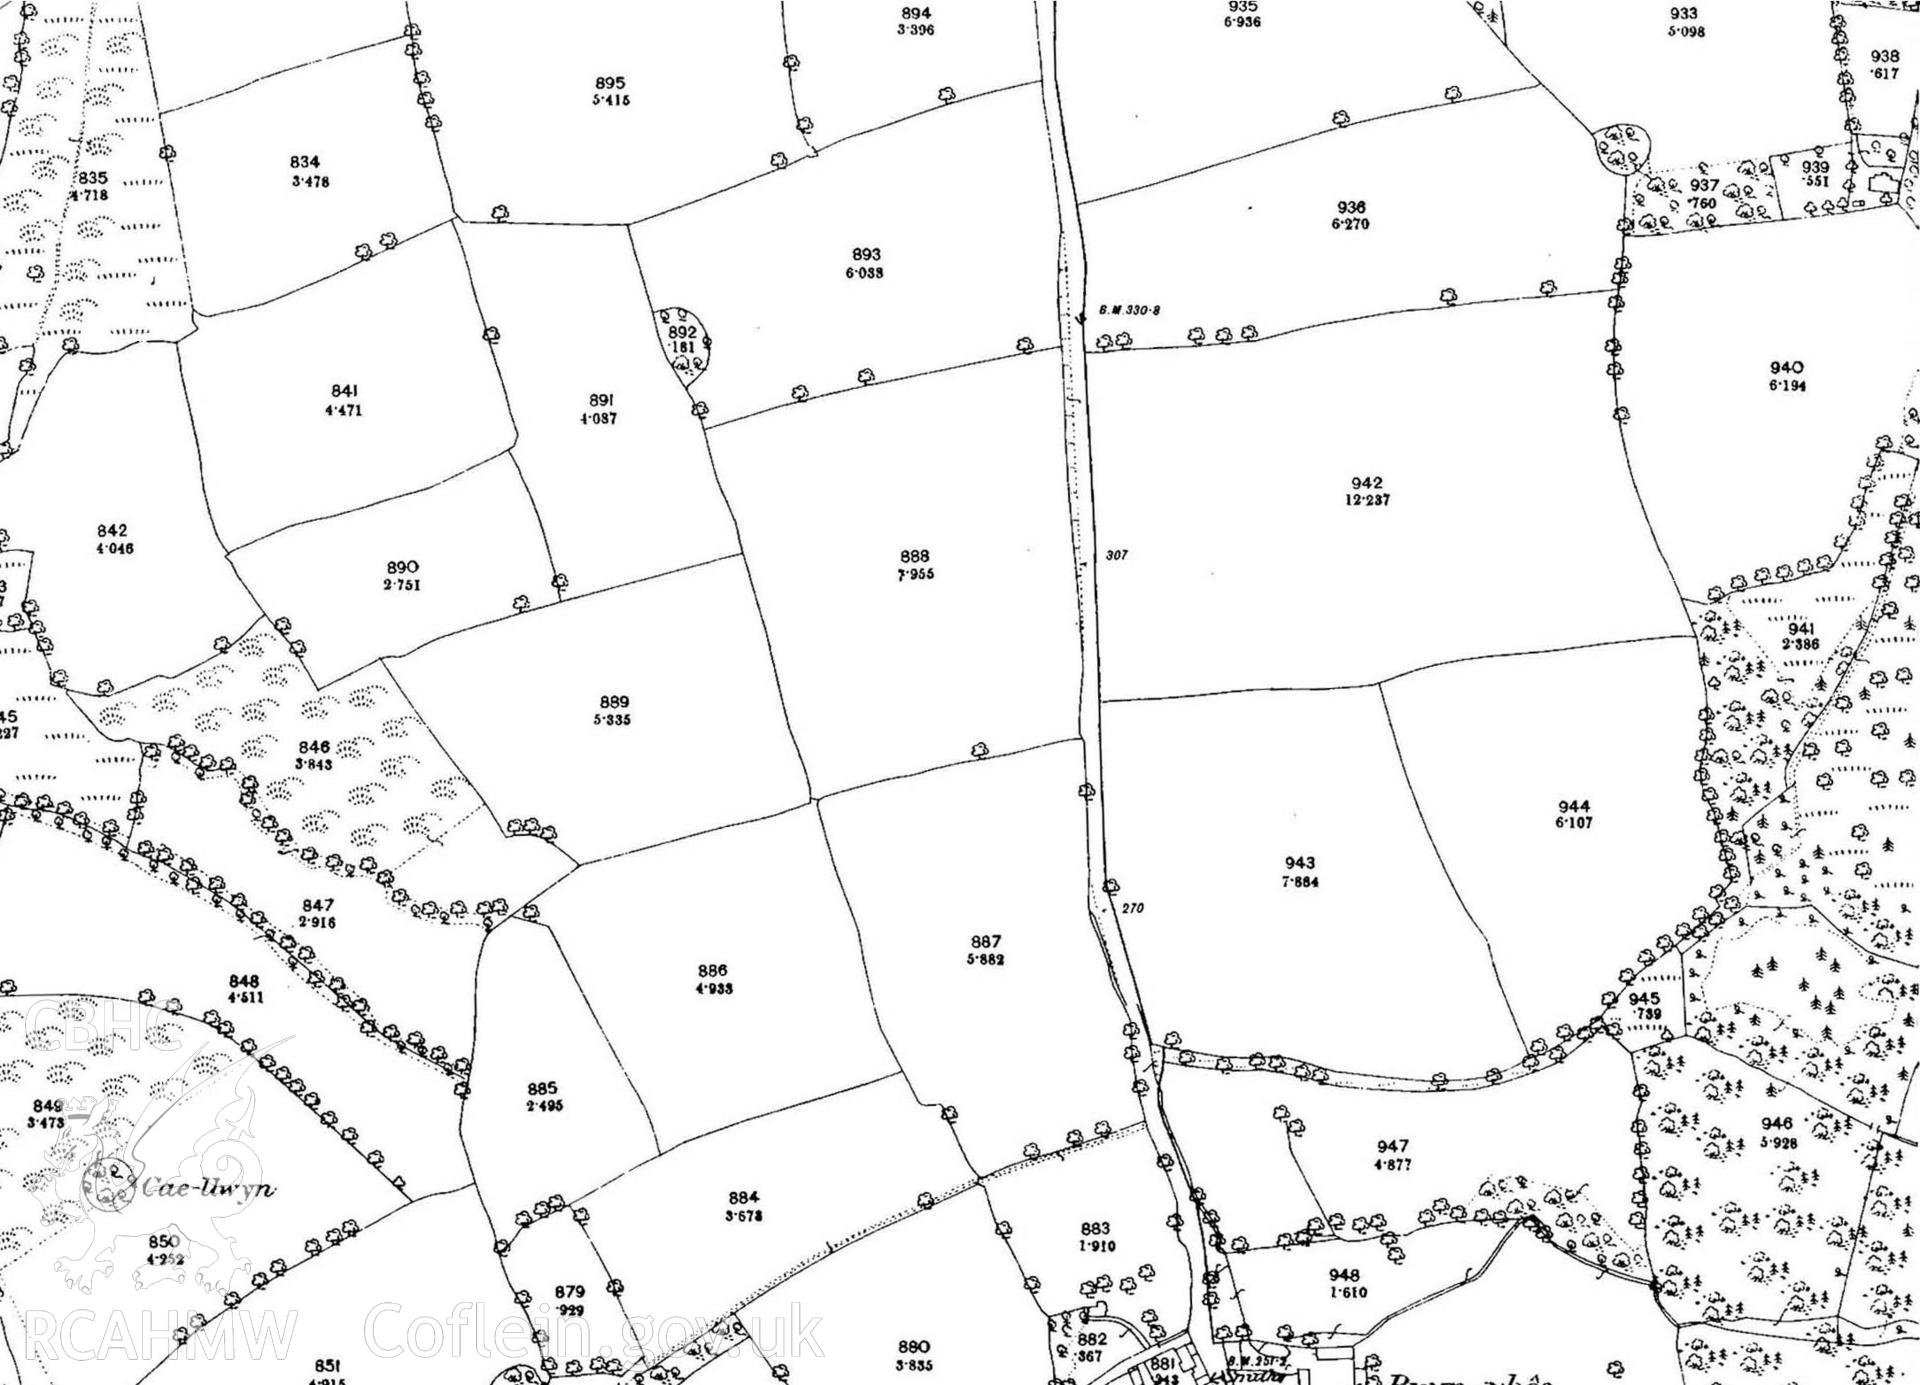 Digital copy of part of OS map sheet XIV.11 M. It depicts part of the Penllergare Estate and the surrounding area.